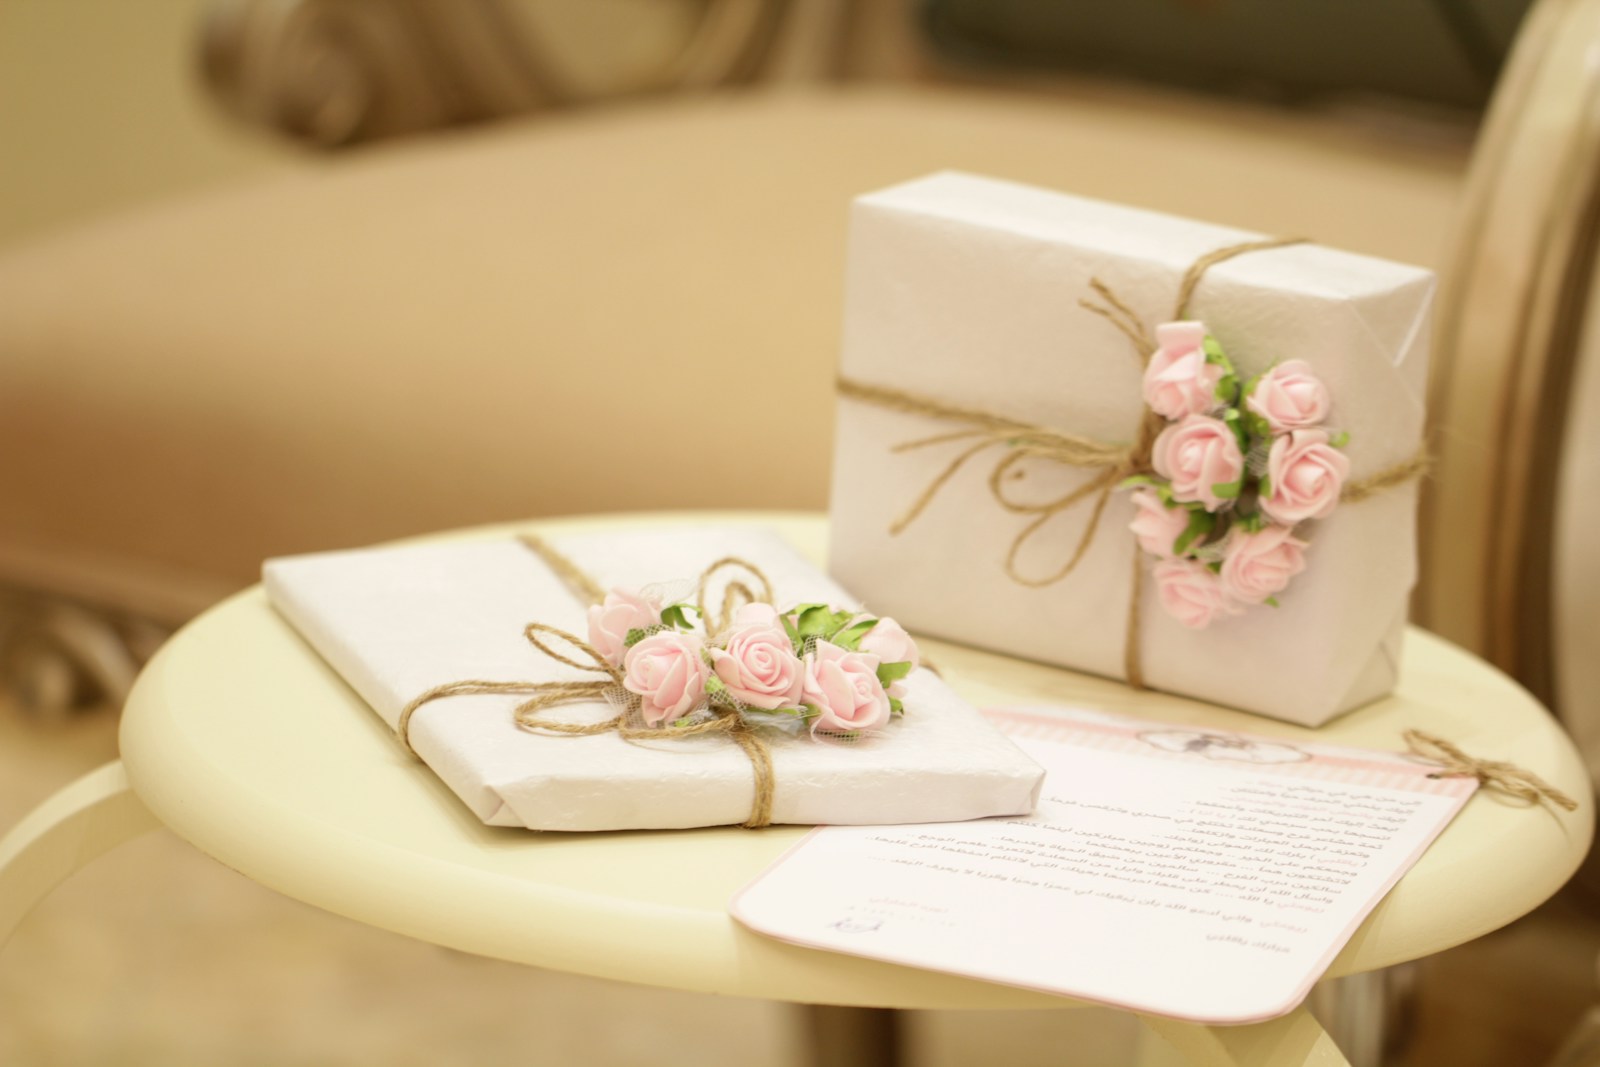 What is a great wedding gift for a couple starting a household? - Quora